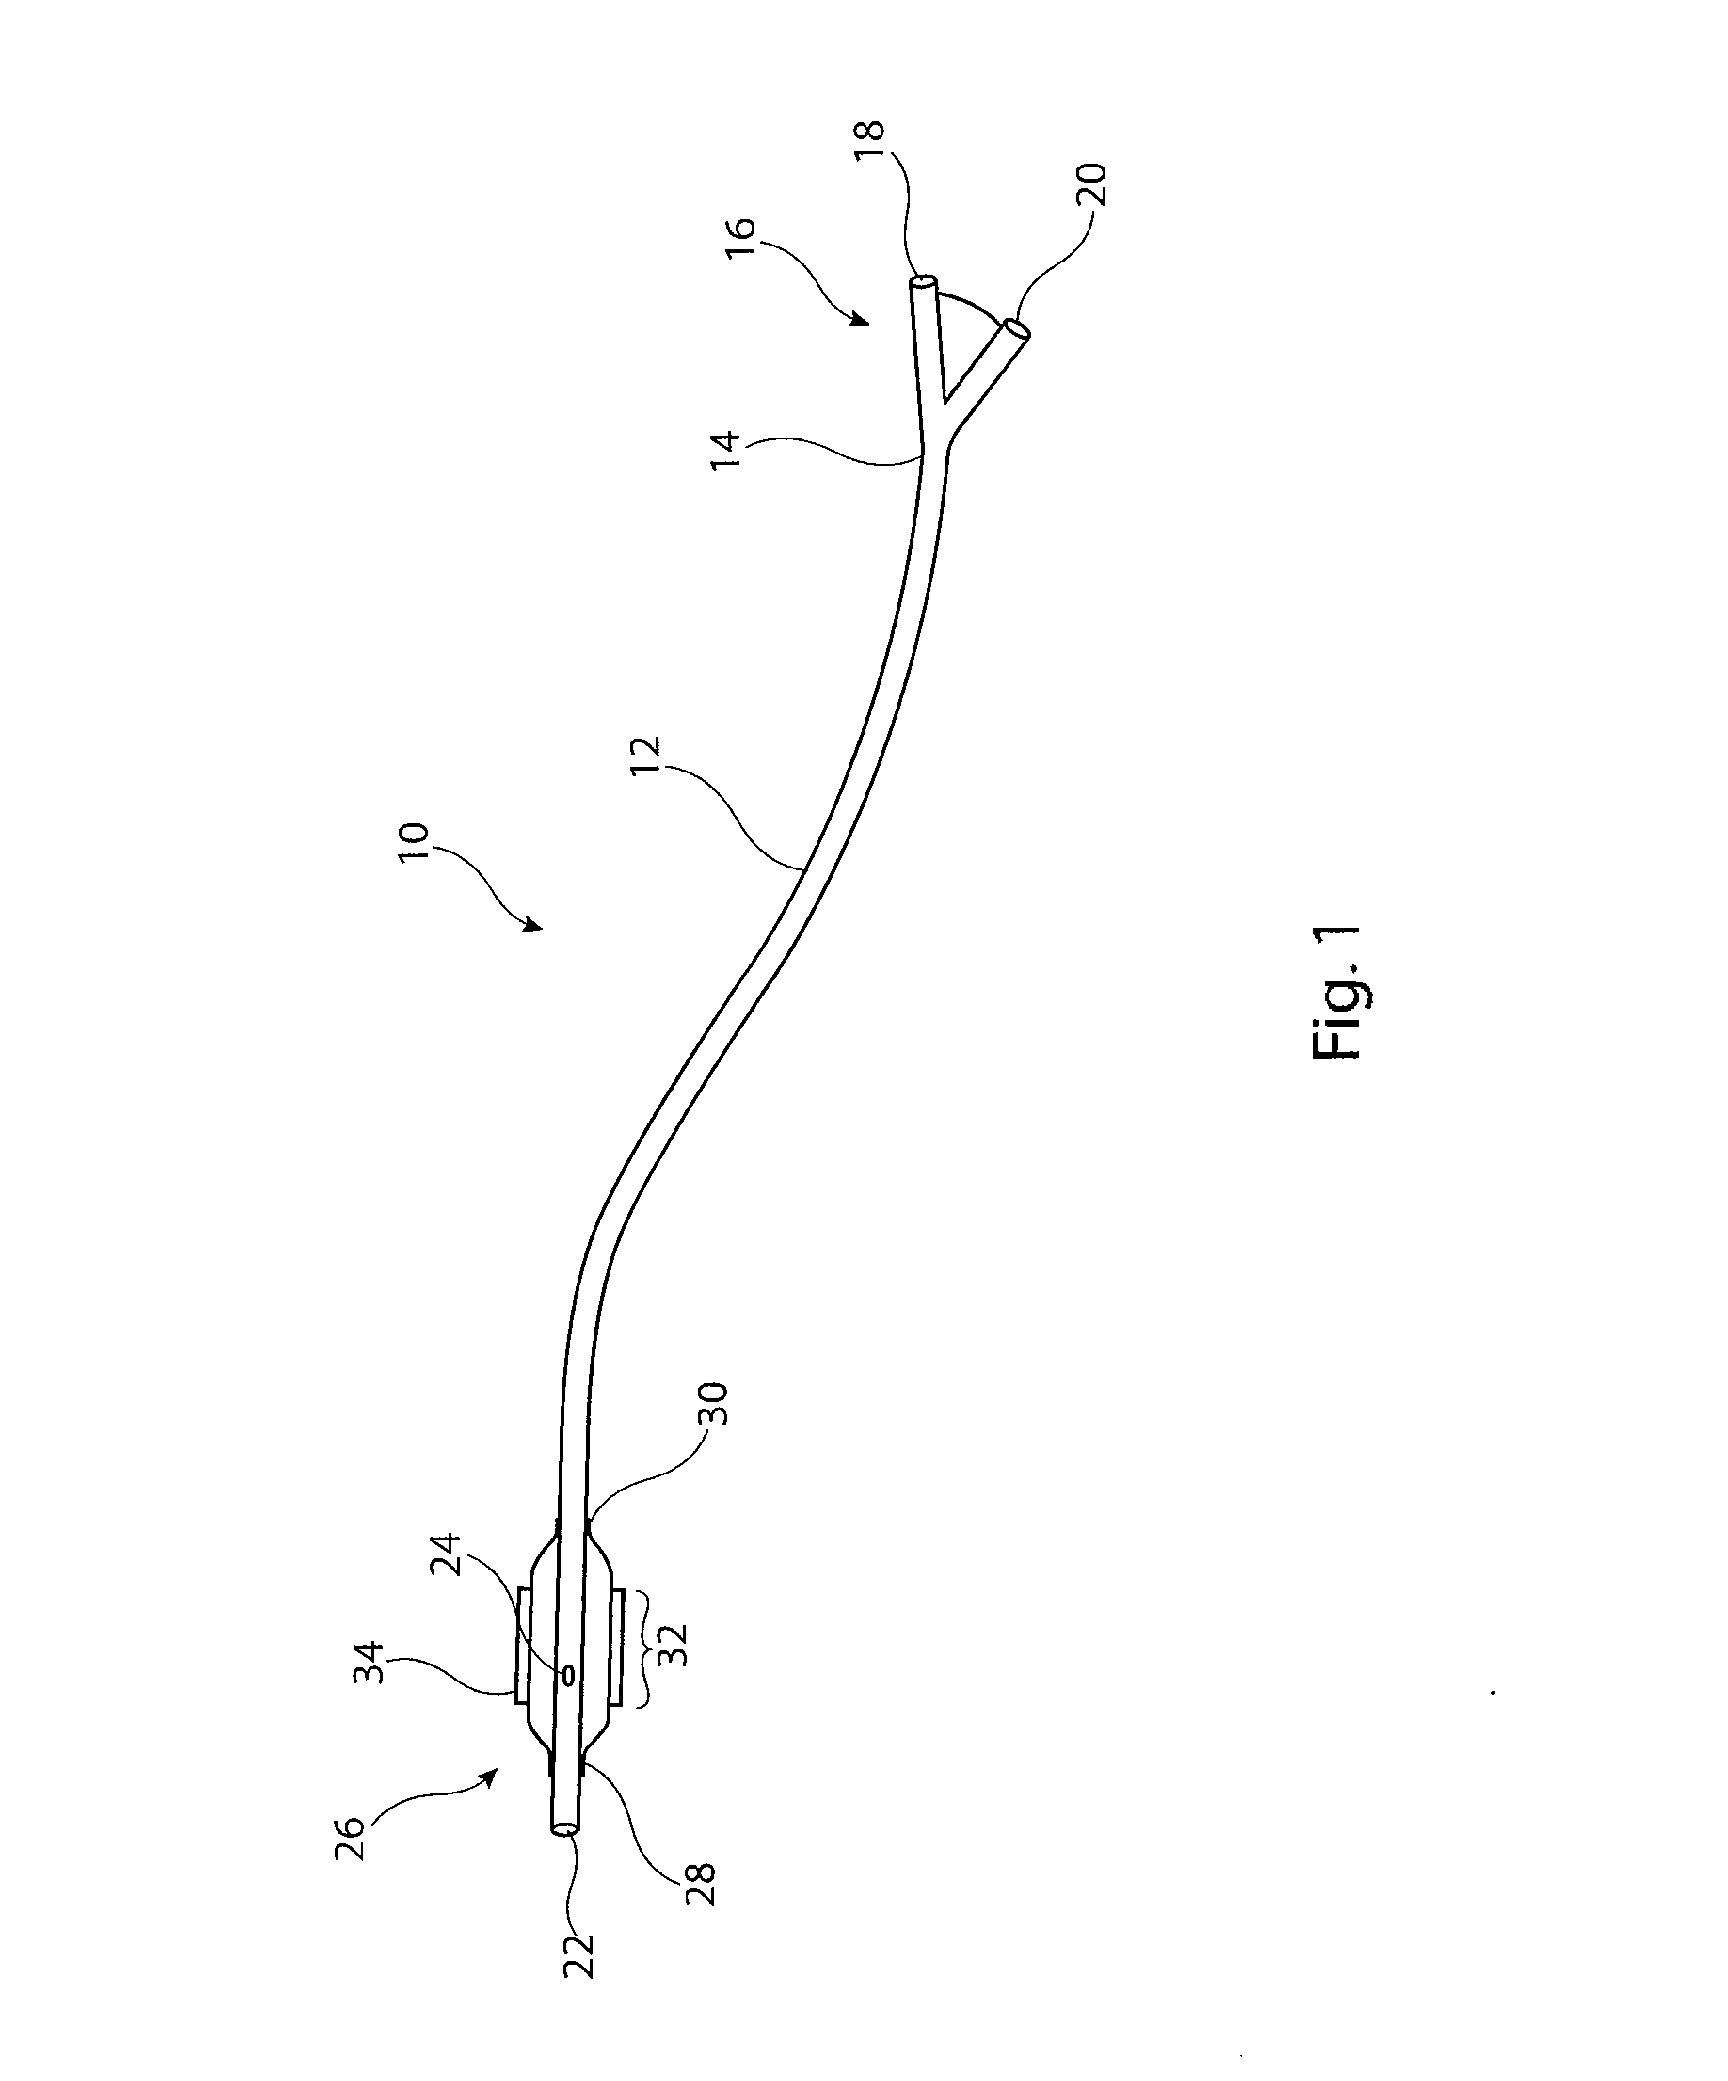 Cutting or scoring balloon and apparatus therefor